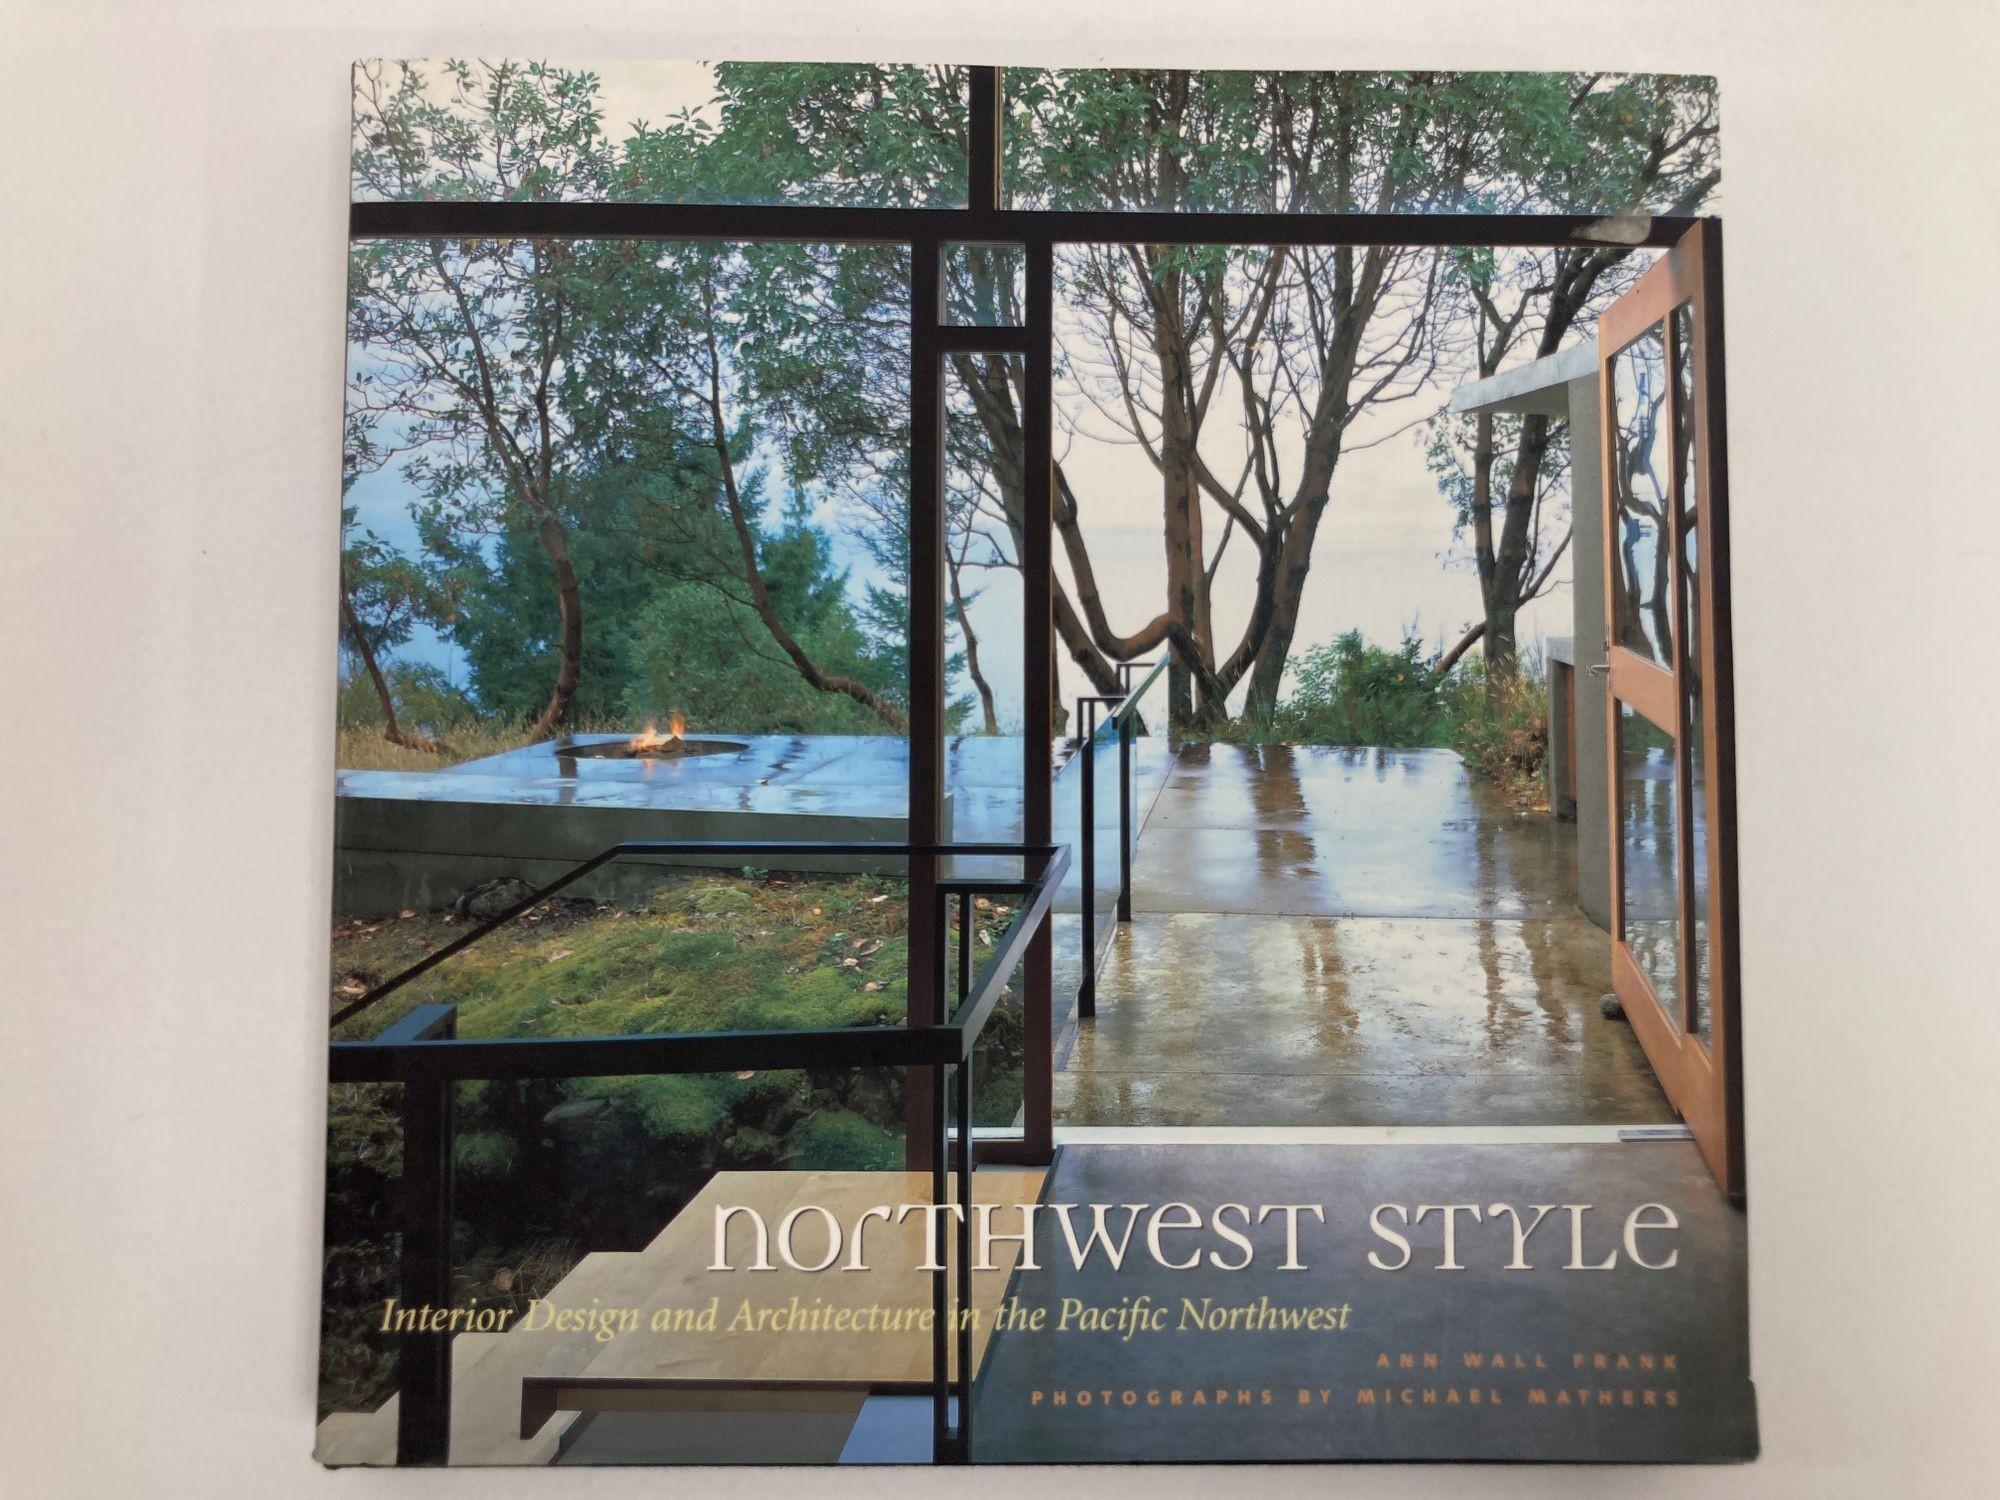 Northwest Style: Interior Design and Architecture in the Pacific Northwest Hardcover Book.
By Ann Wall Frank Chronicle Books, 1st edition,Oct 1, 1999 - Architecture - San Francisco, 204 pages.
With its lush forests, rugged coast, and long rainy